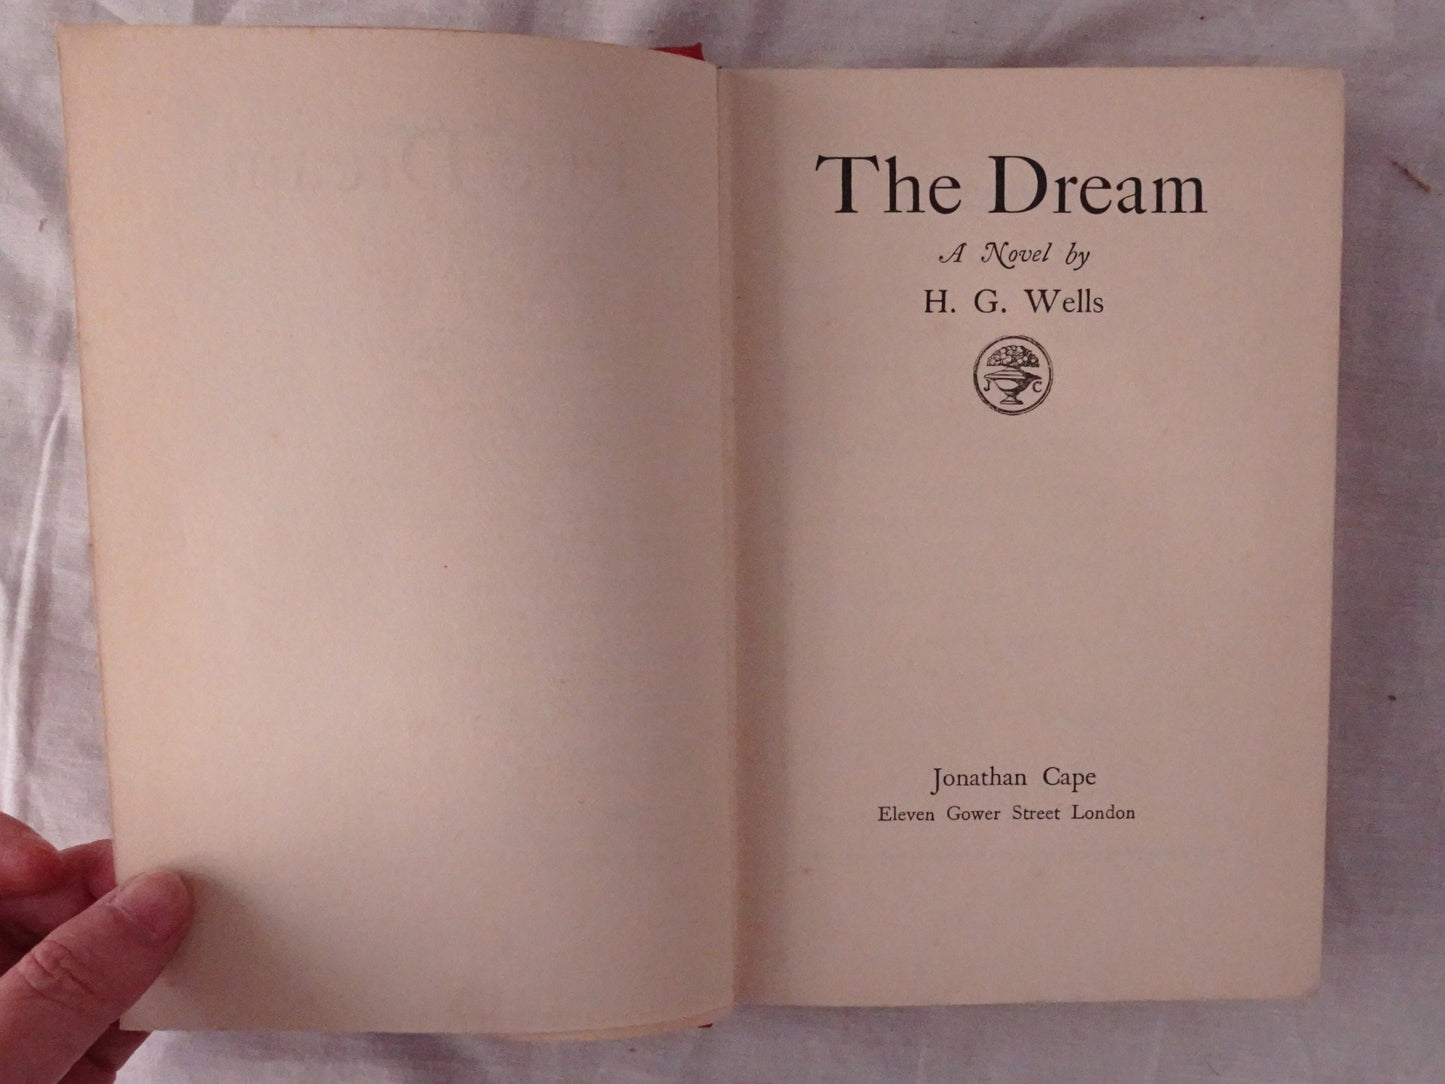 The Dream by H. G. Wells